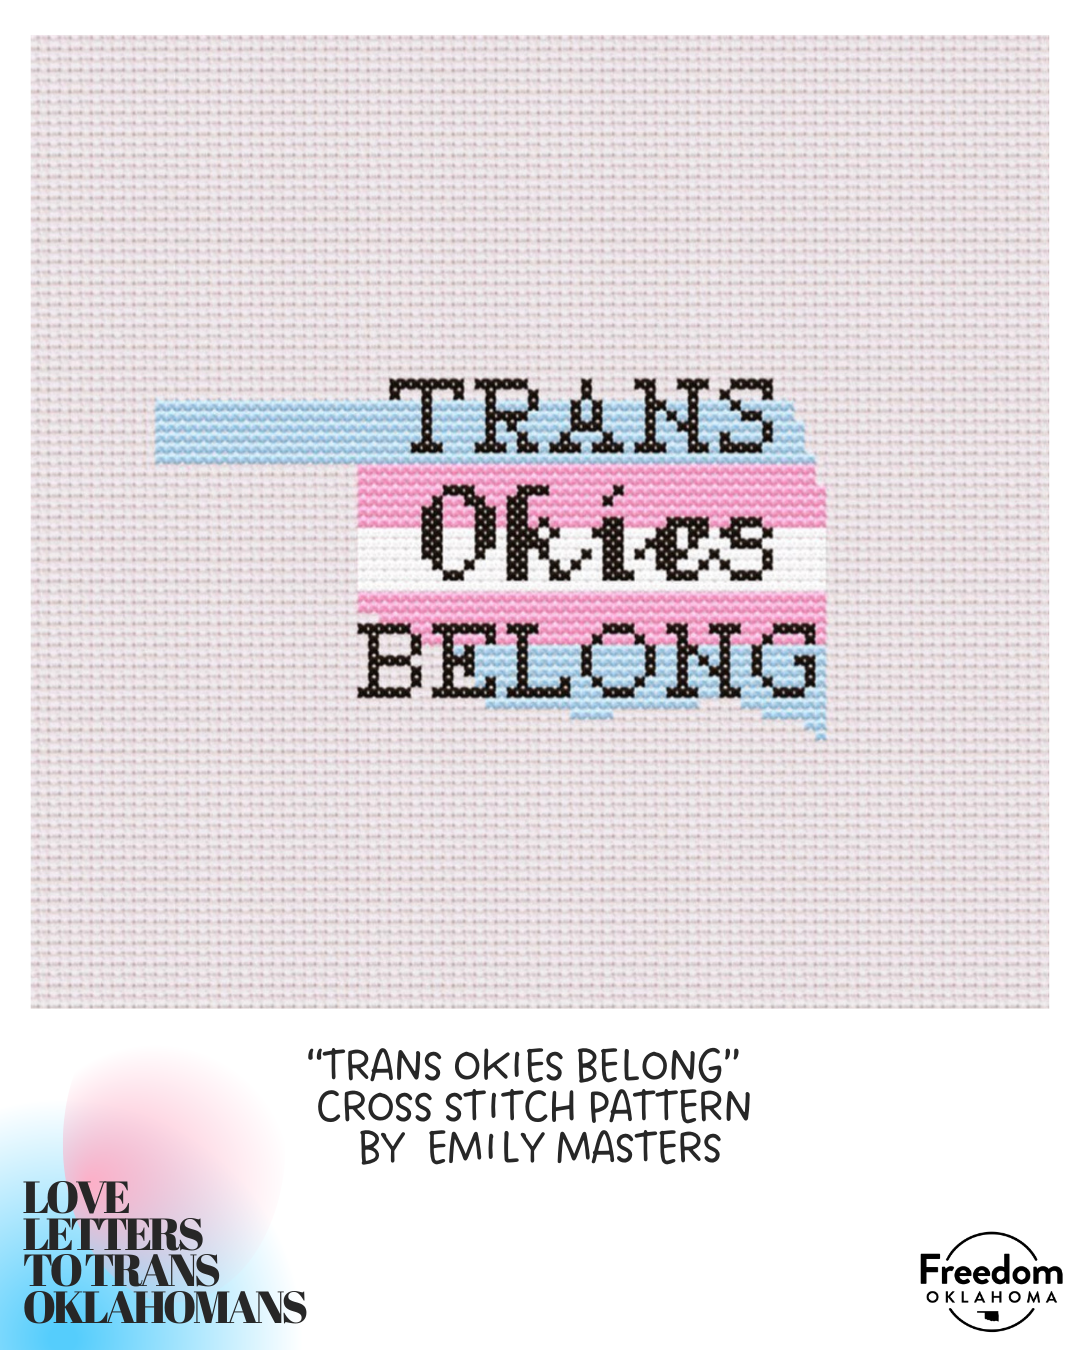  White background with "Love Letters to Trans Oklahomans" in the bottom left. Most of the image is an art submission: “Trans Okies Belong” Cross Stitch Pattern by Emily Masters. A cross stitch&nbsp;pattern of "Trans Okies Belong" on an outline of the